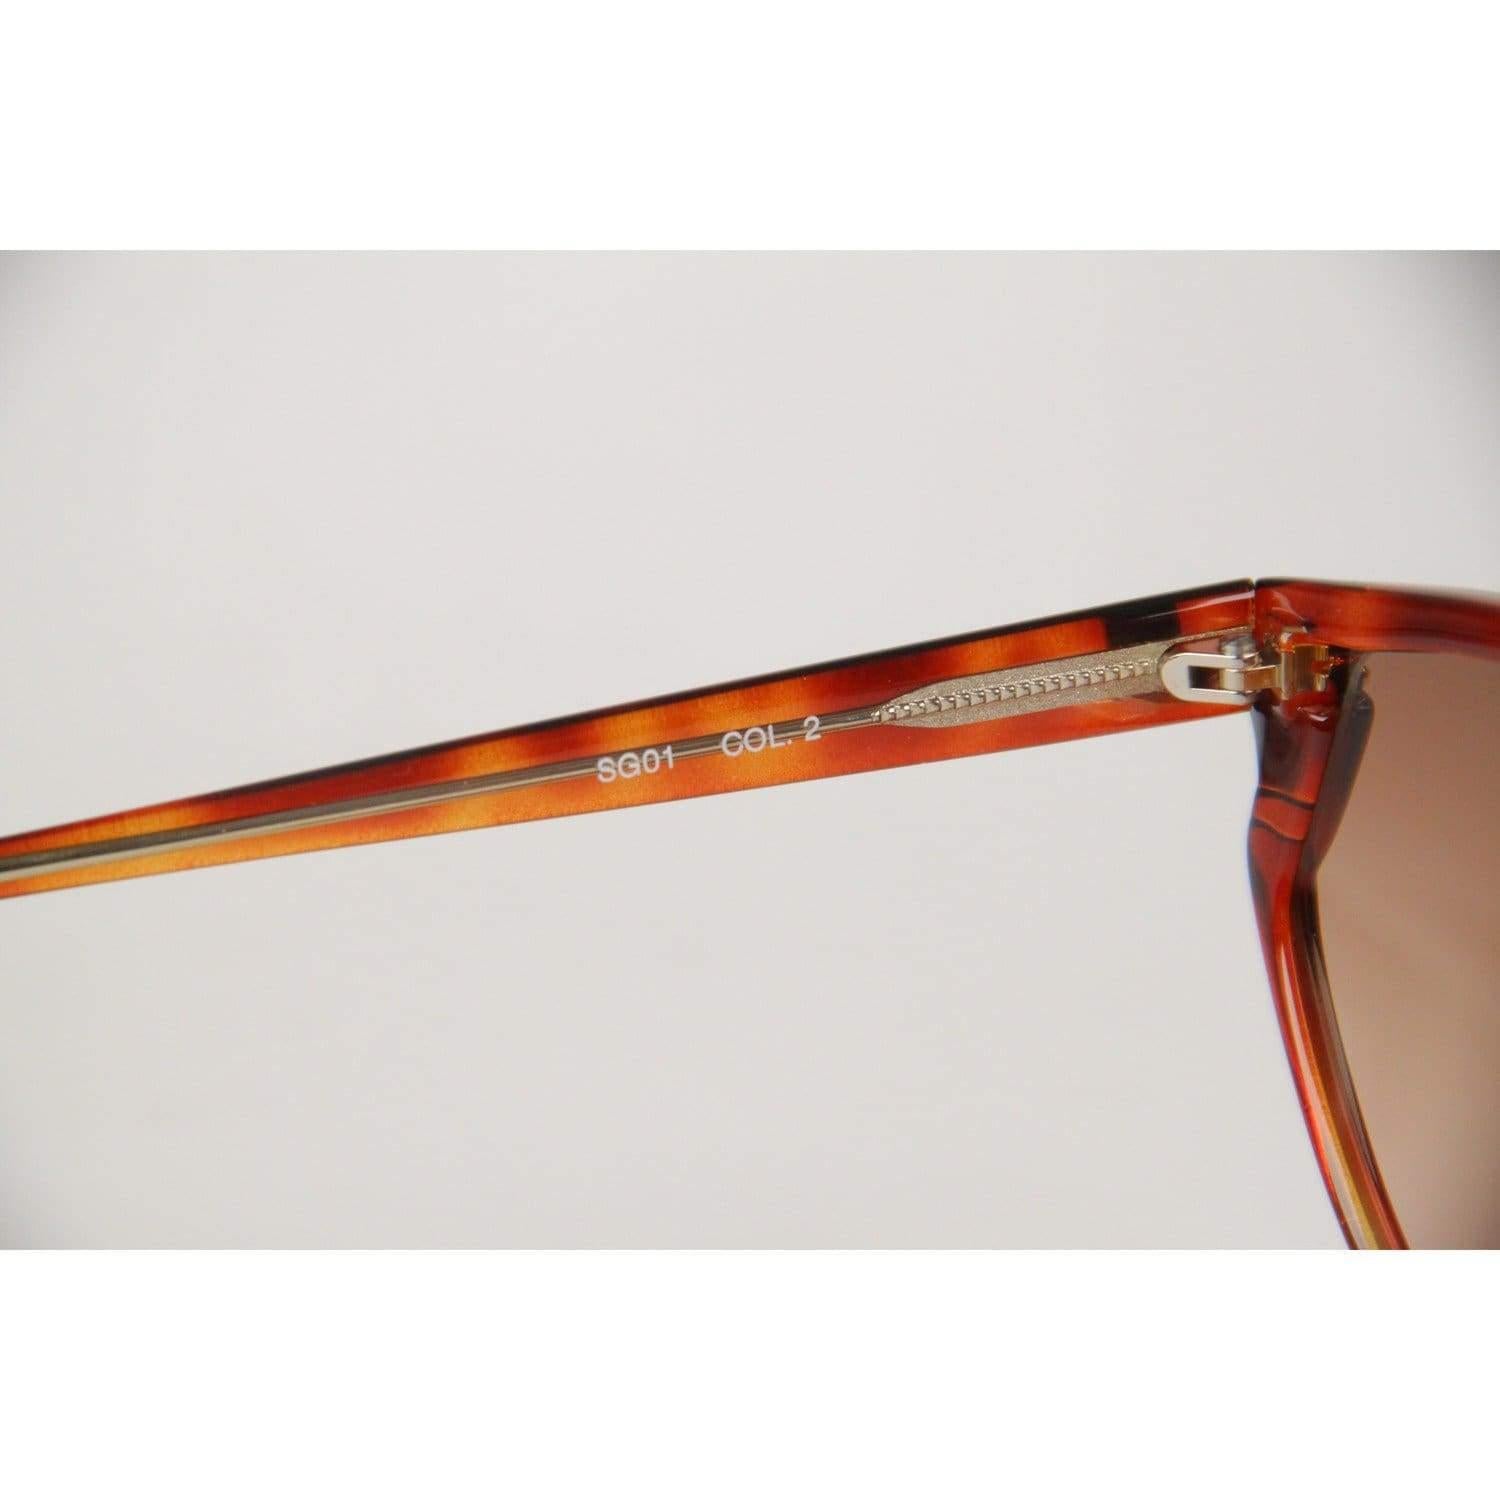 Givenchy Vintage Brown Sunglasses SG01 COL 02 1